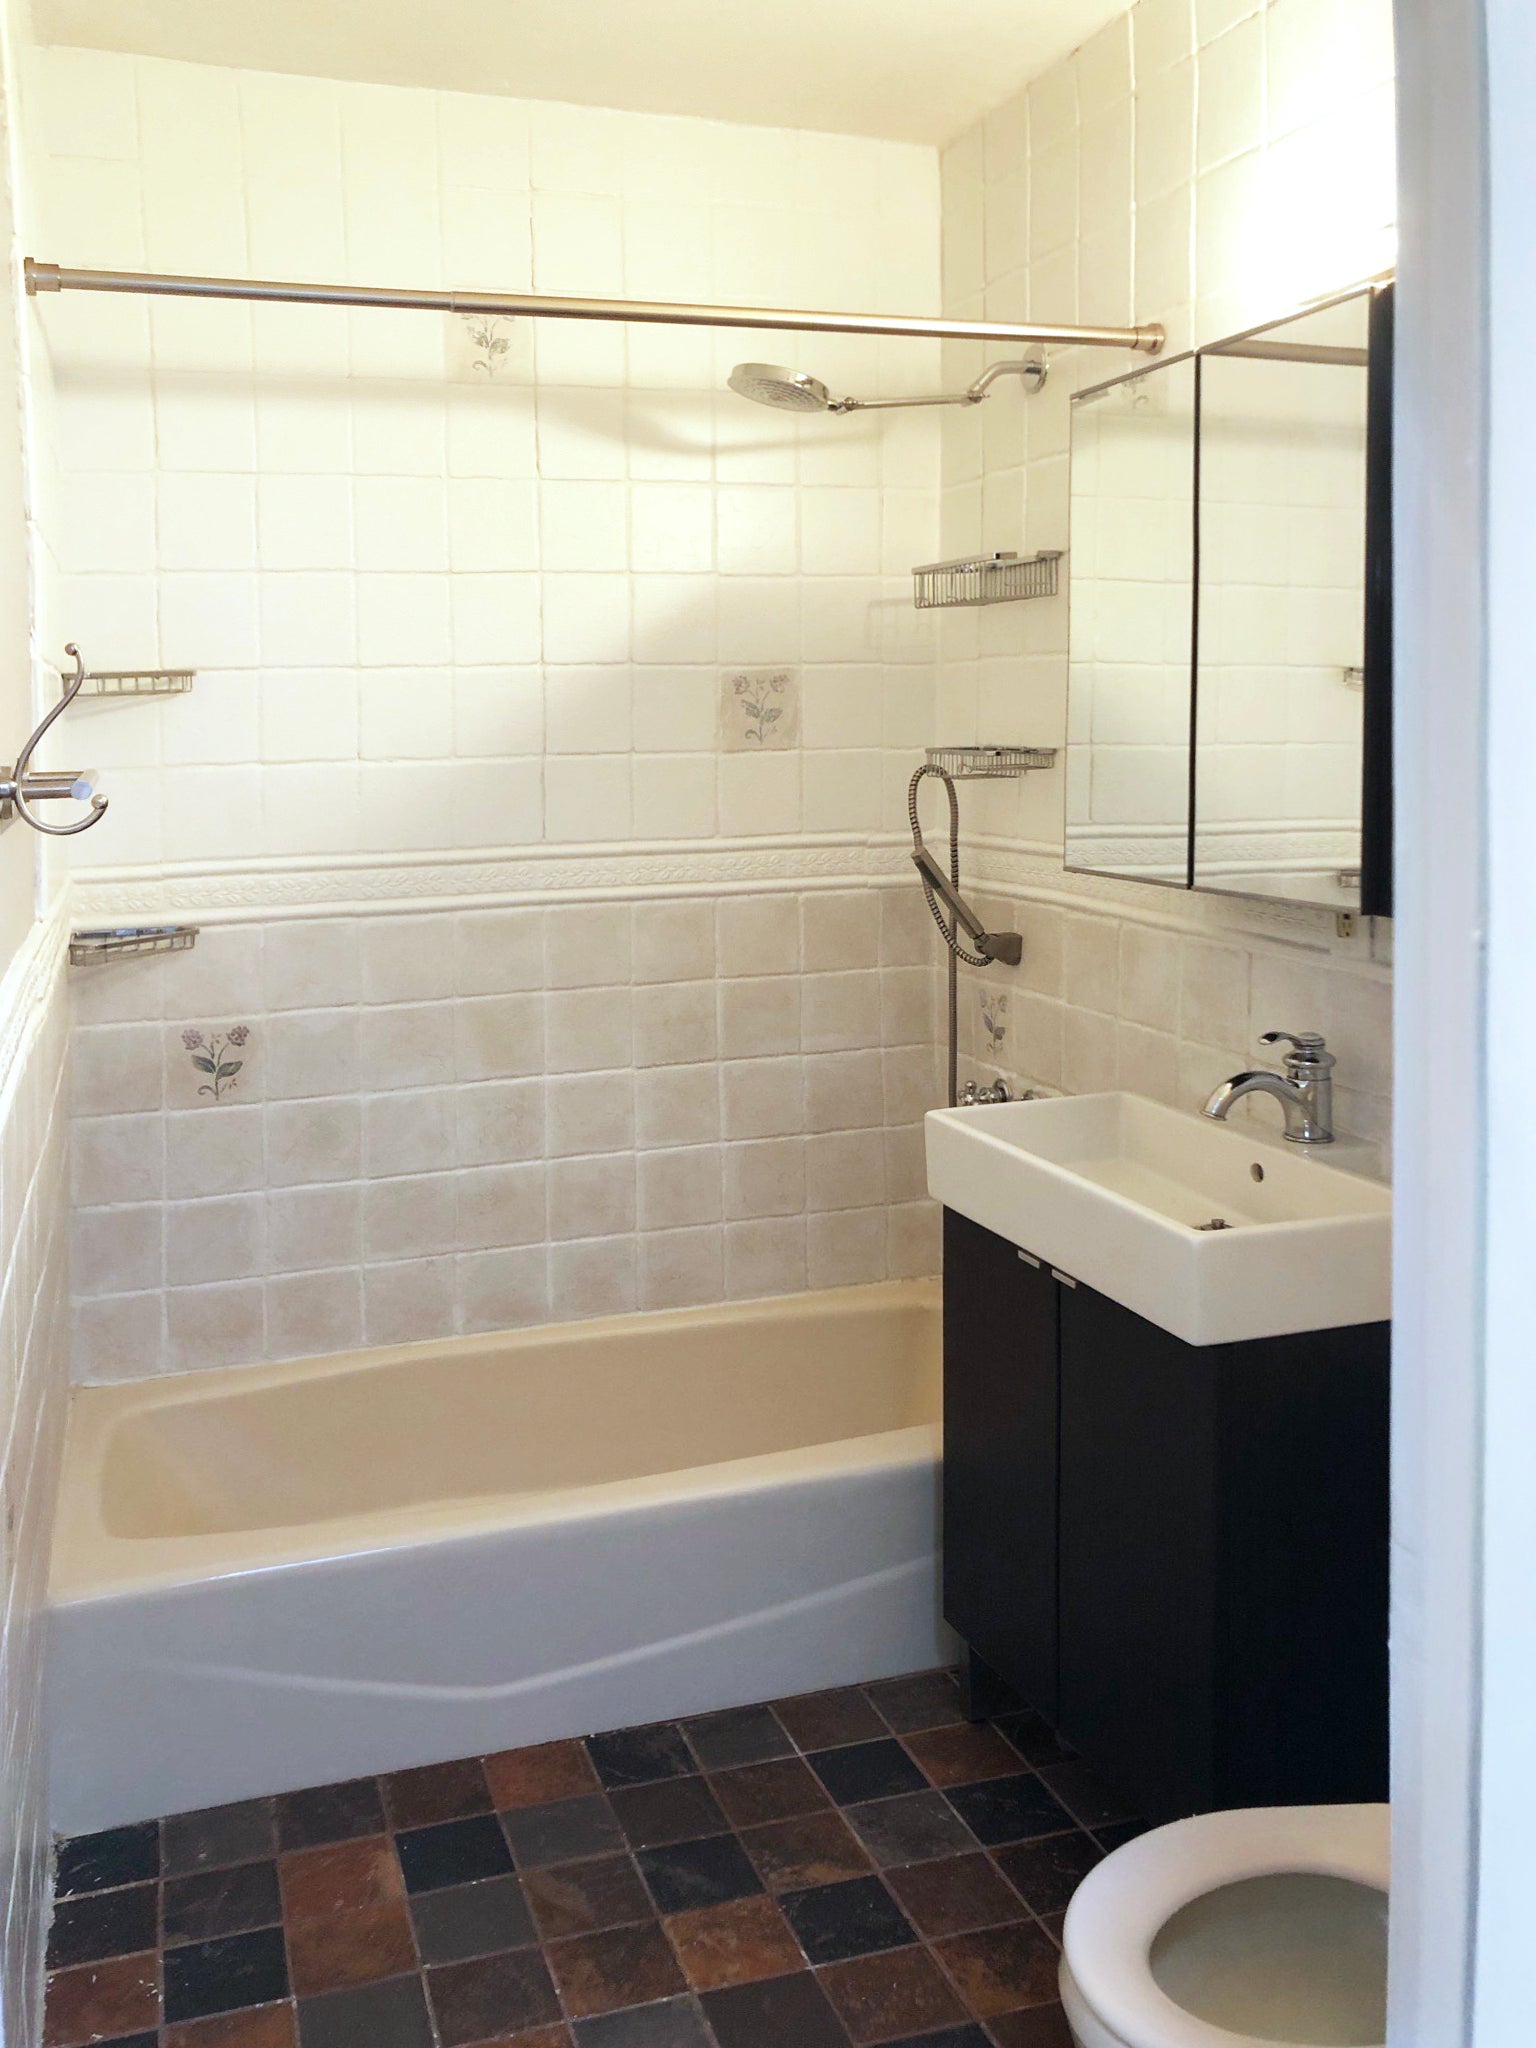 After Being Quoted $100K, We DIYed Our NYC Kitchen and Bath for ¼ of the Cost